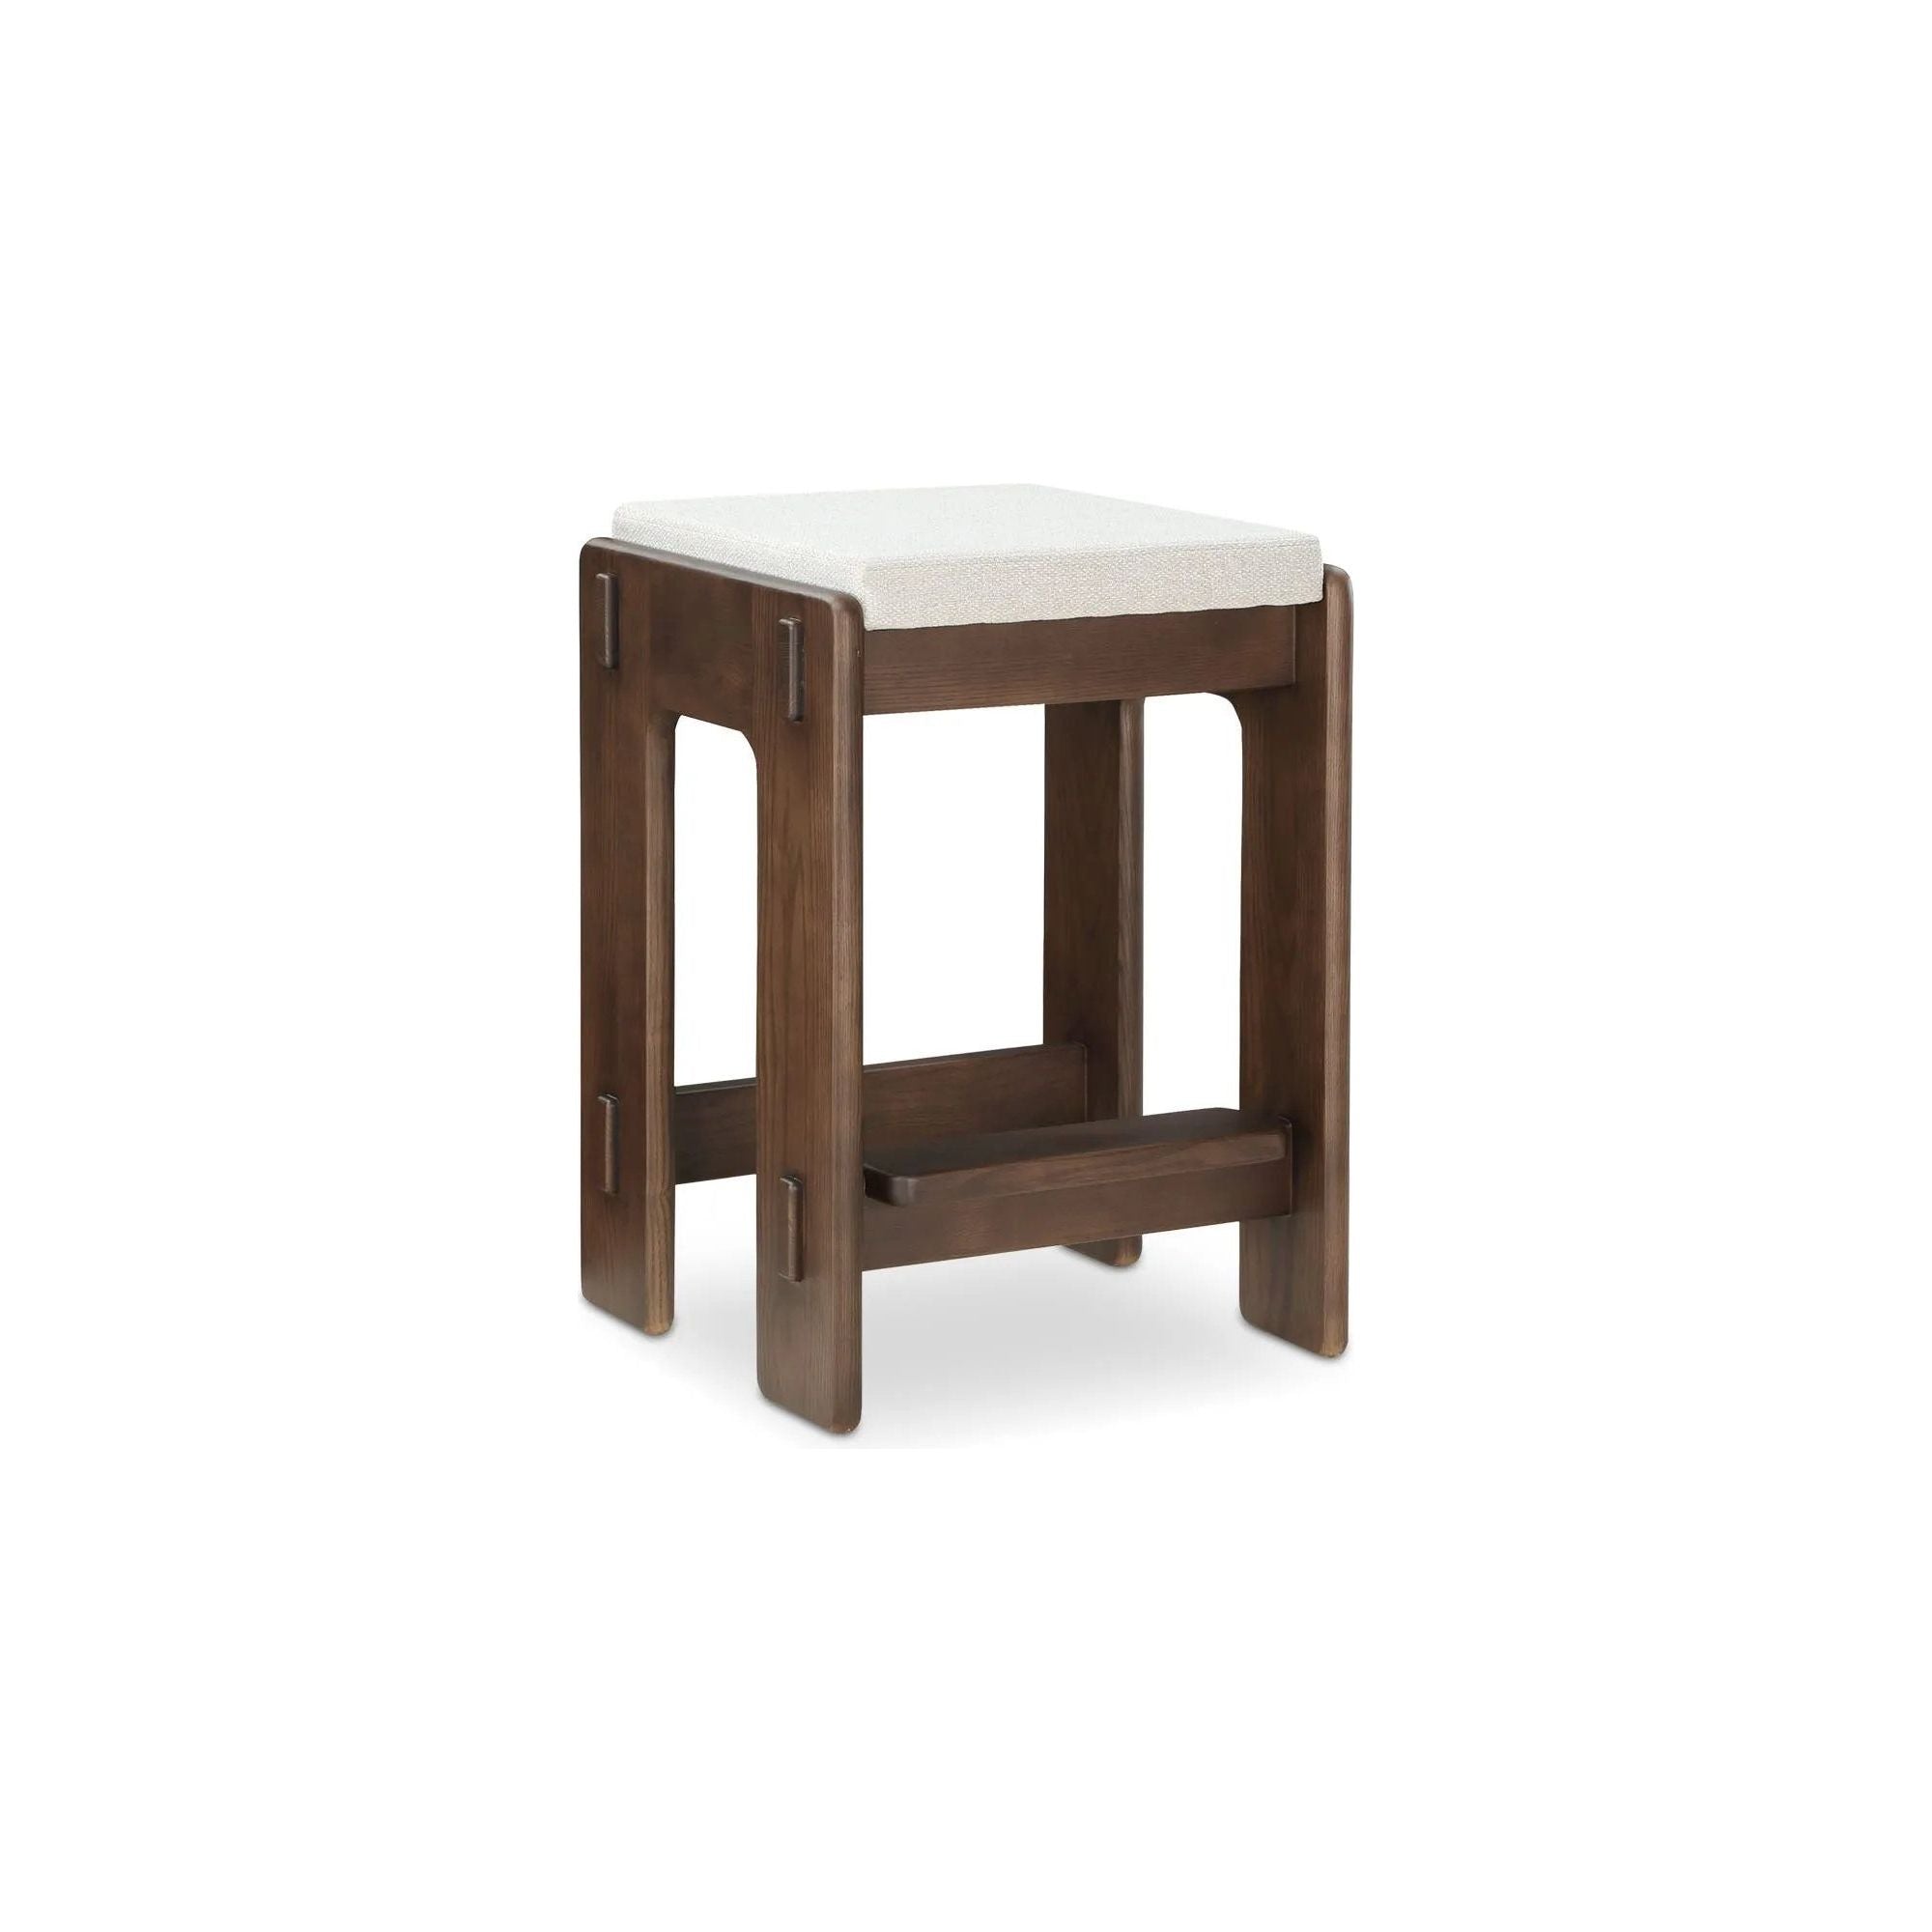 Crafted with a deep connection to Okinawa, Japan, the birthplace of these designs, the Ashby counter stool is inspired by cherished memories of the past with craftsman style joinery detailing Amethyst Home provides interior design, new home construction design consulting, vintage area rugs, and lighting in the Park City metro area.